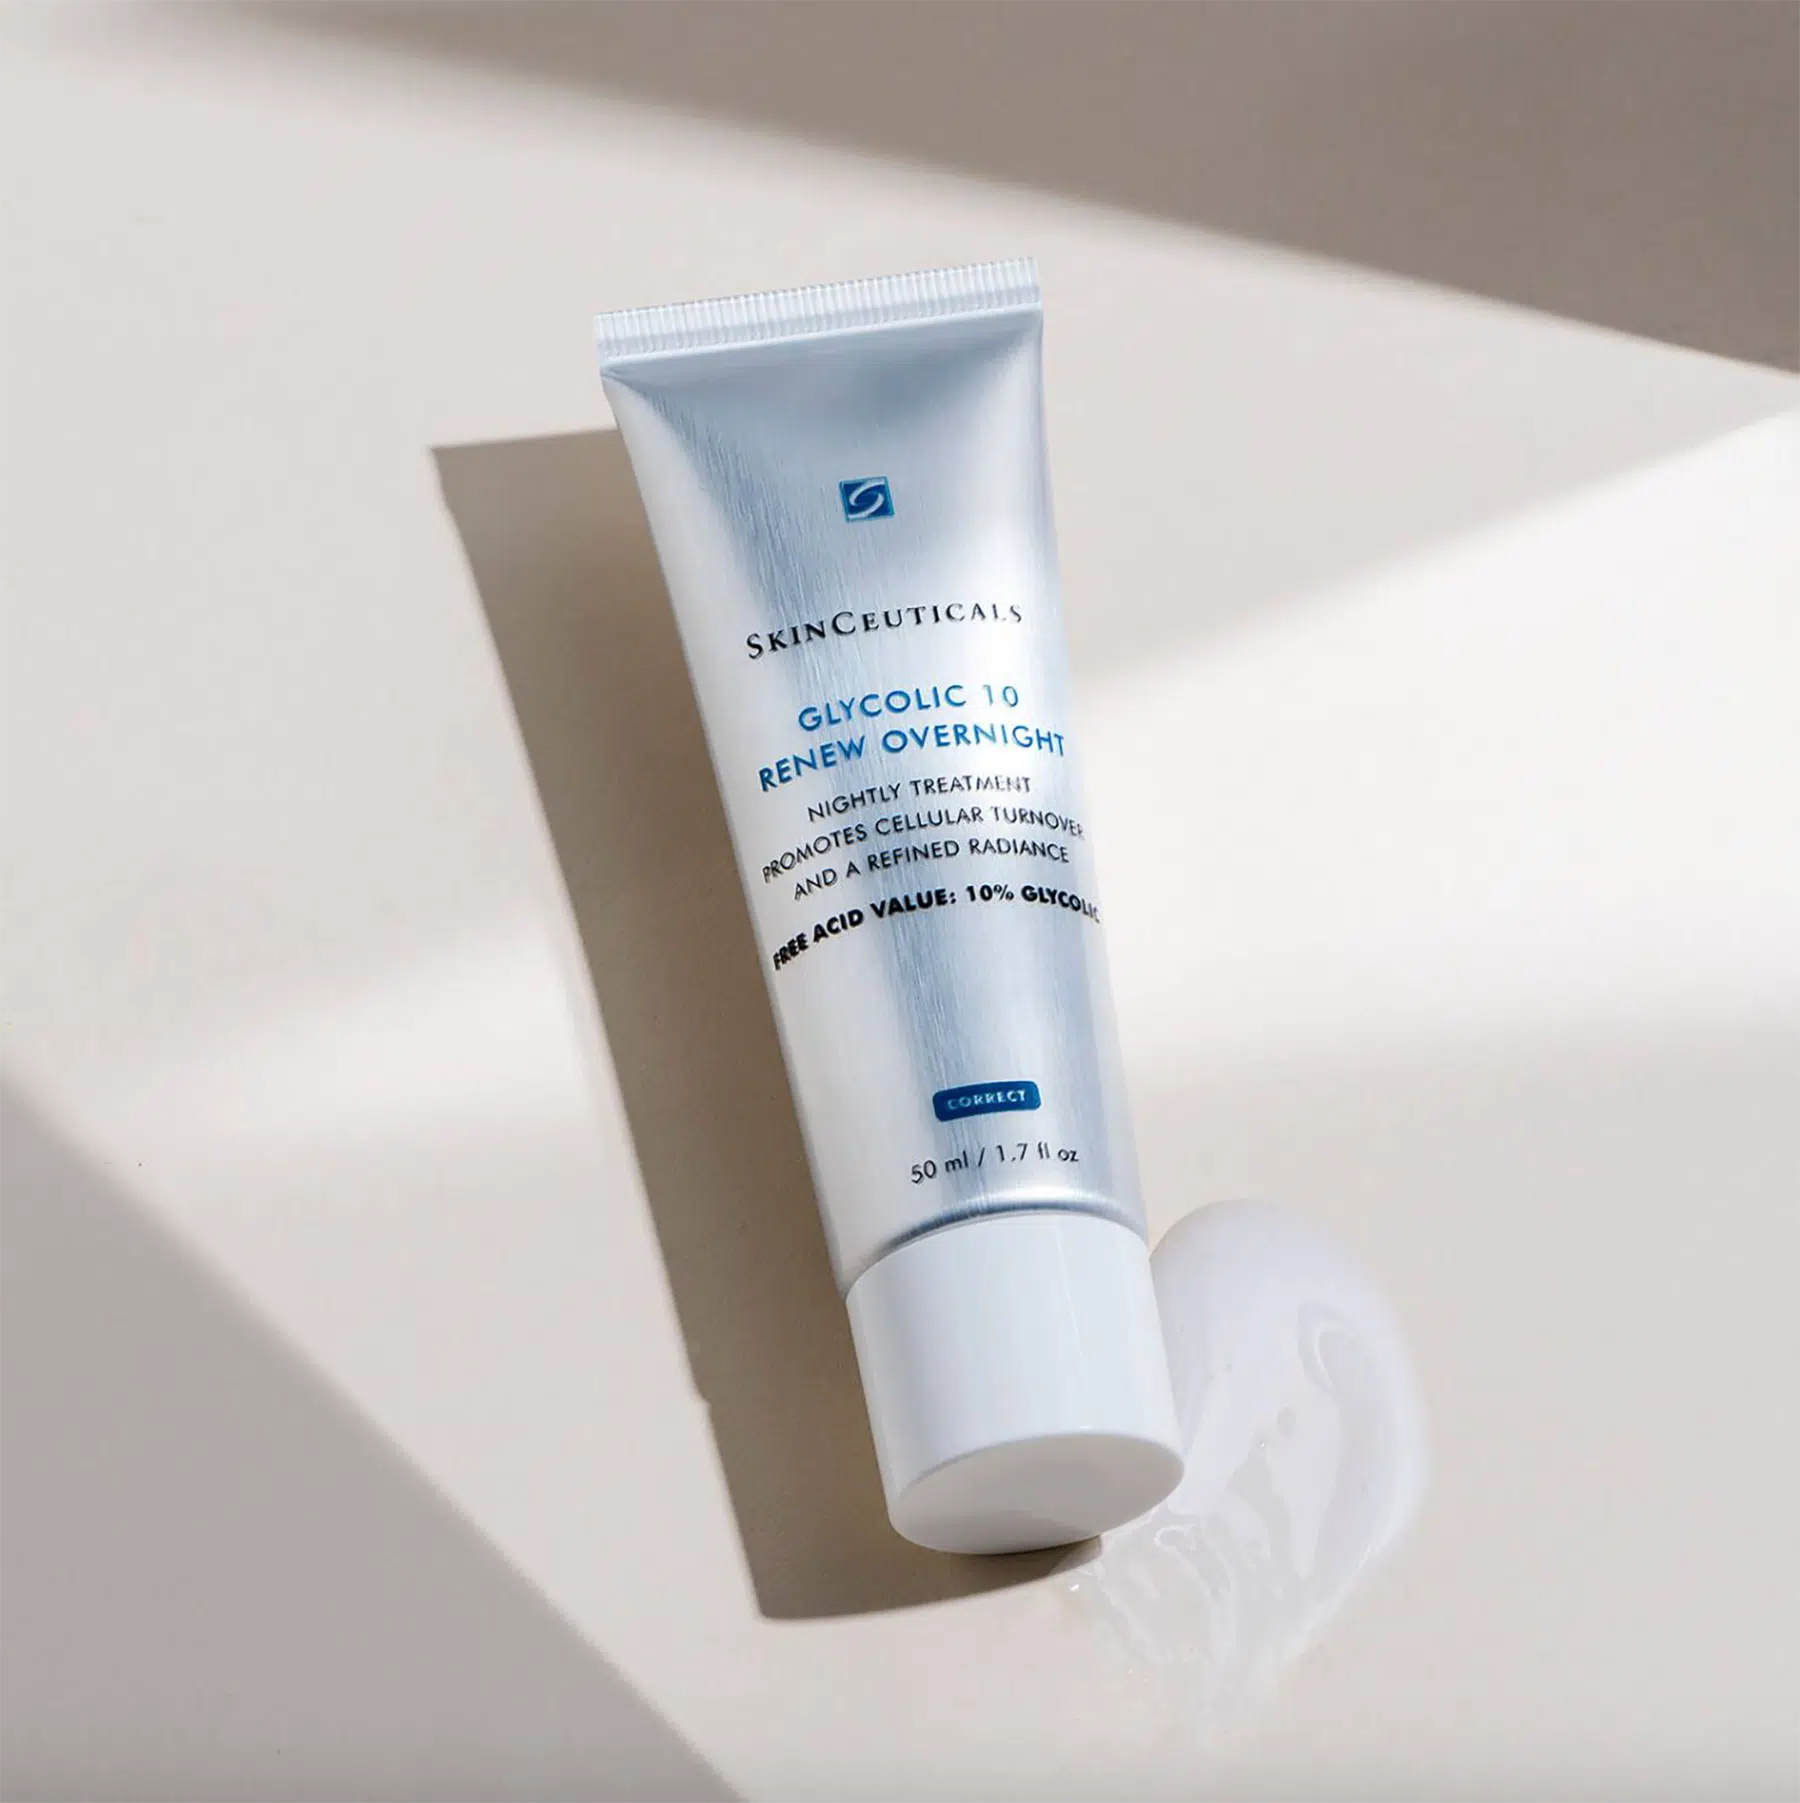 SkinCeuticals Glycolic 10 Renew Overnight Review